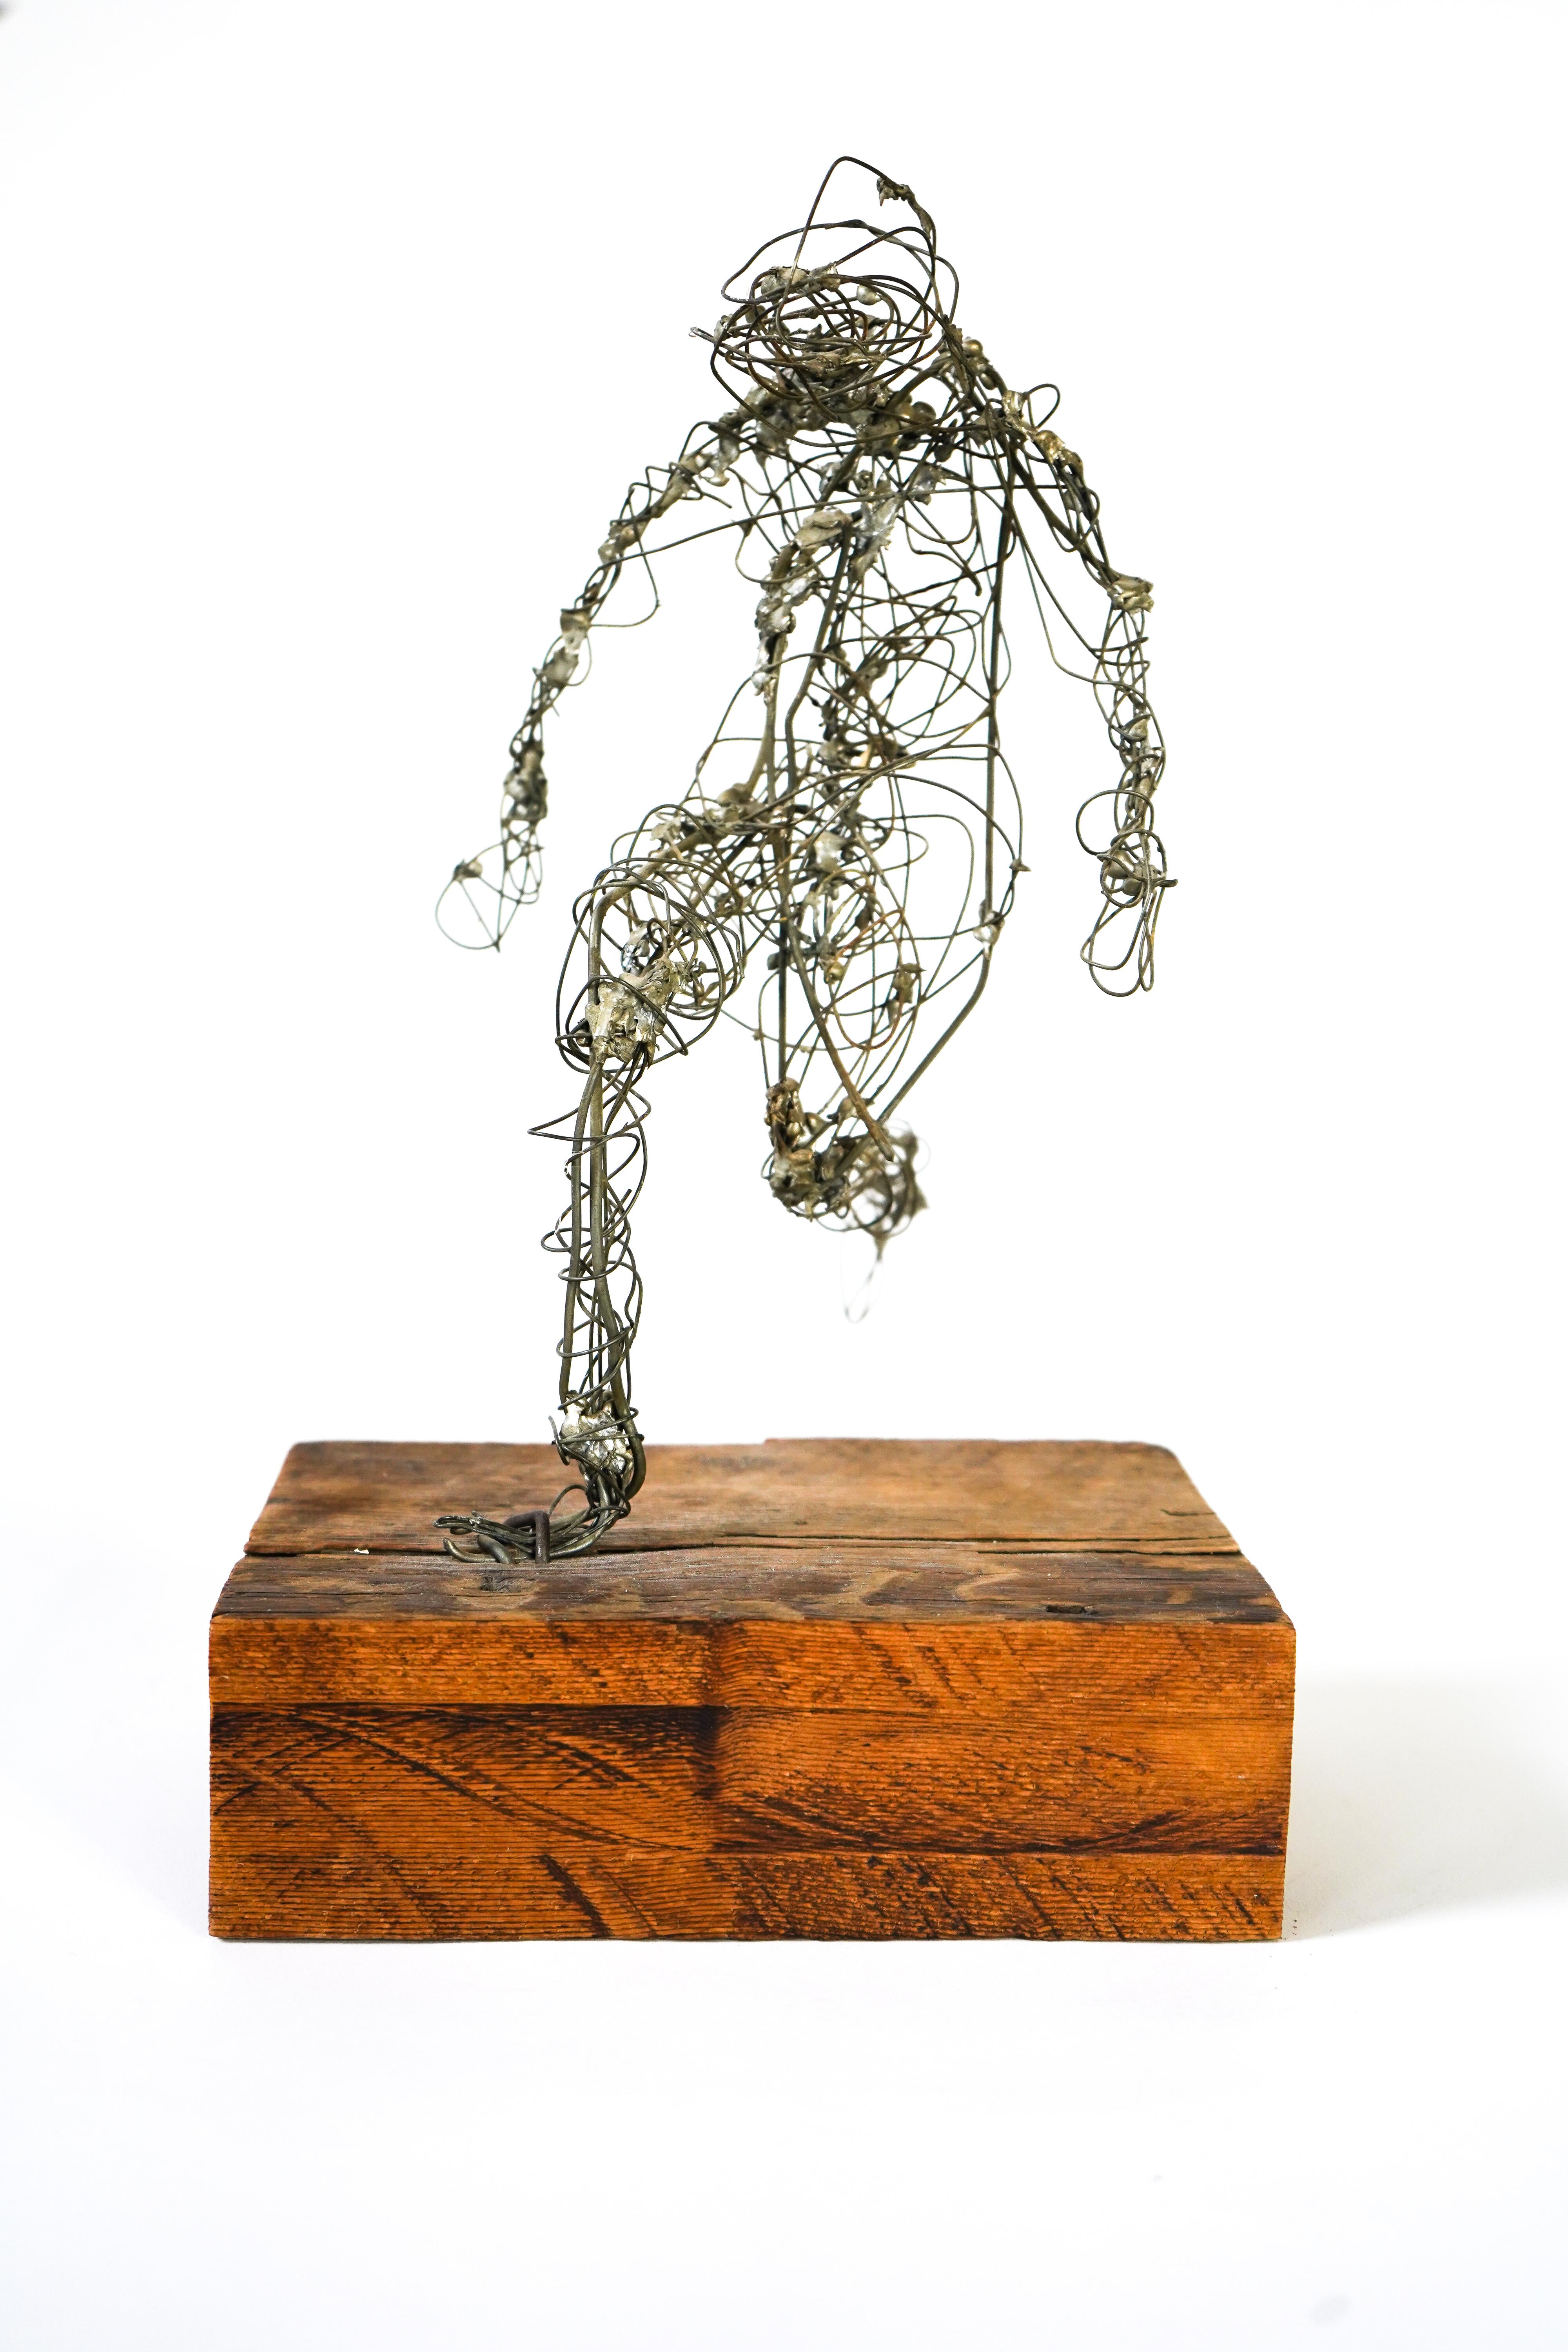 Frances Venardos Gialamas Abstract Wire Figure In Motion Sculpture For Sale 1